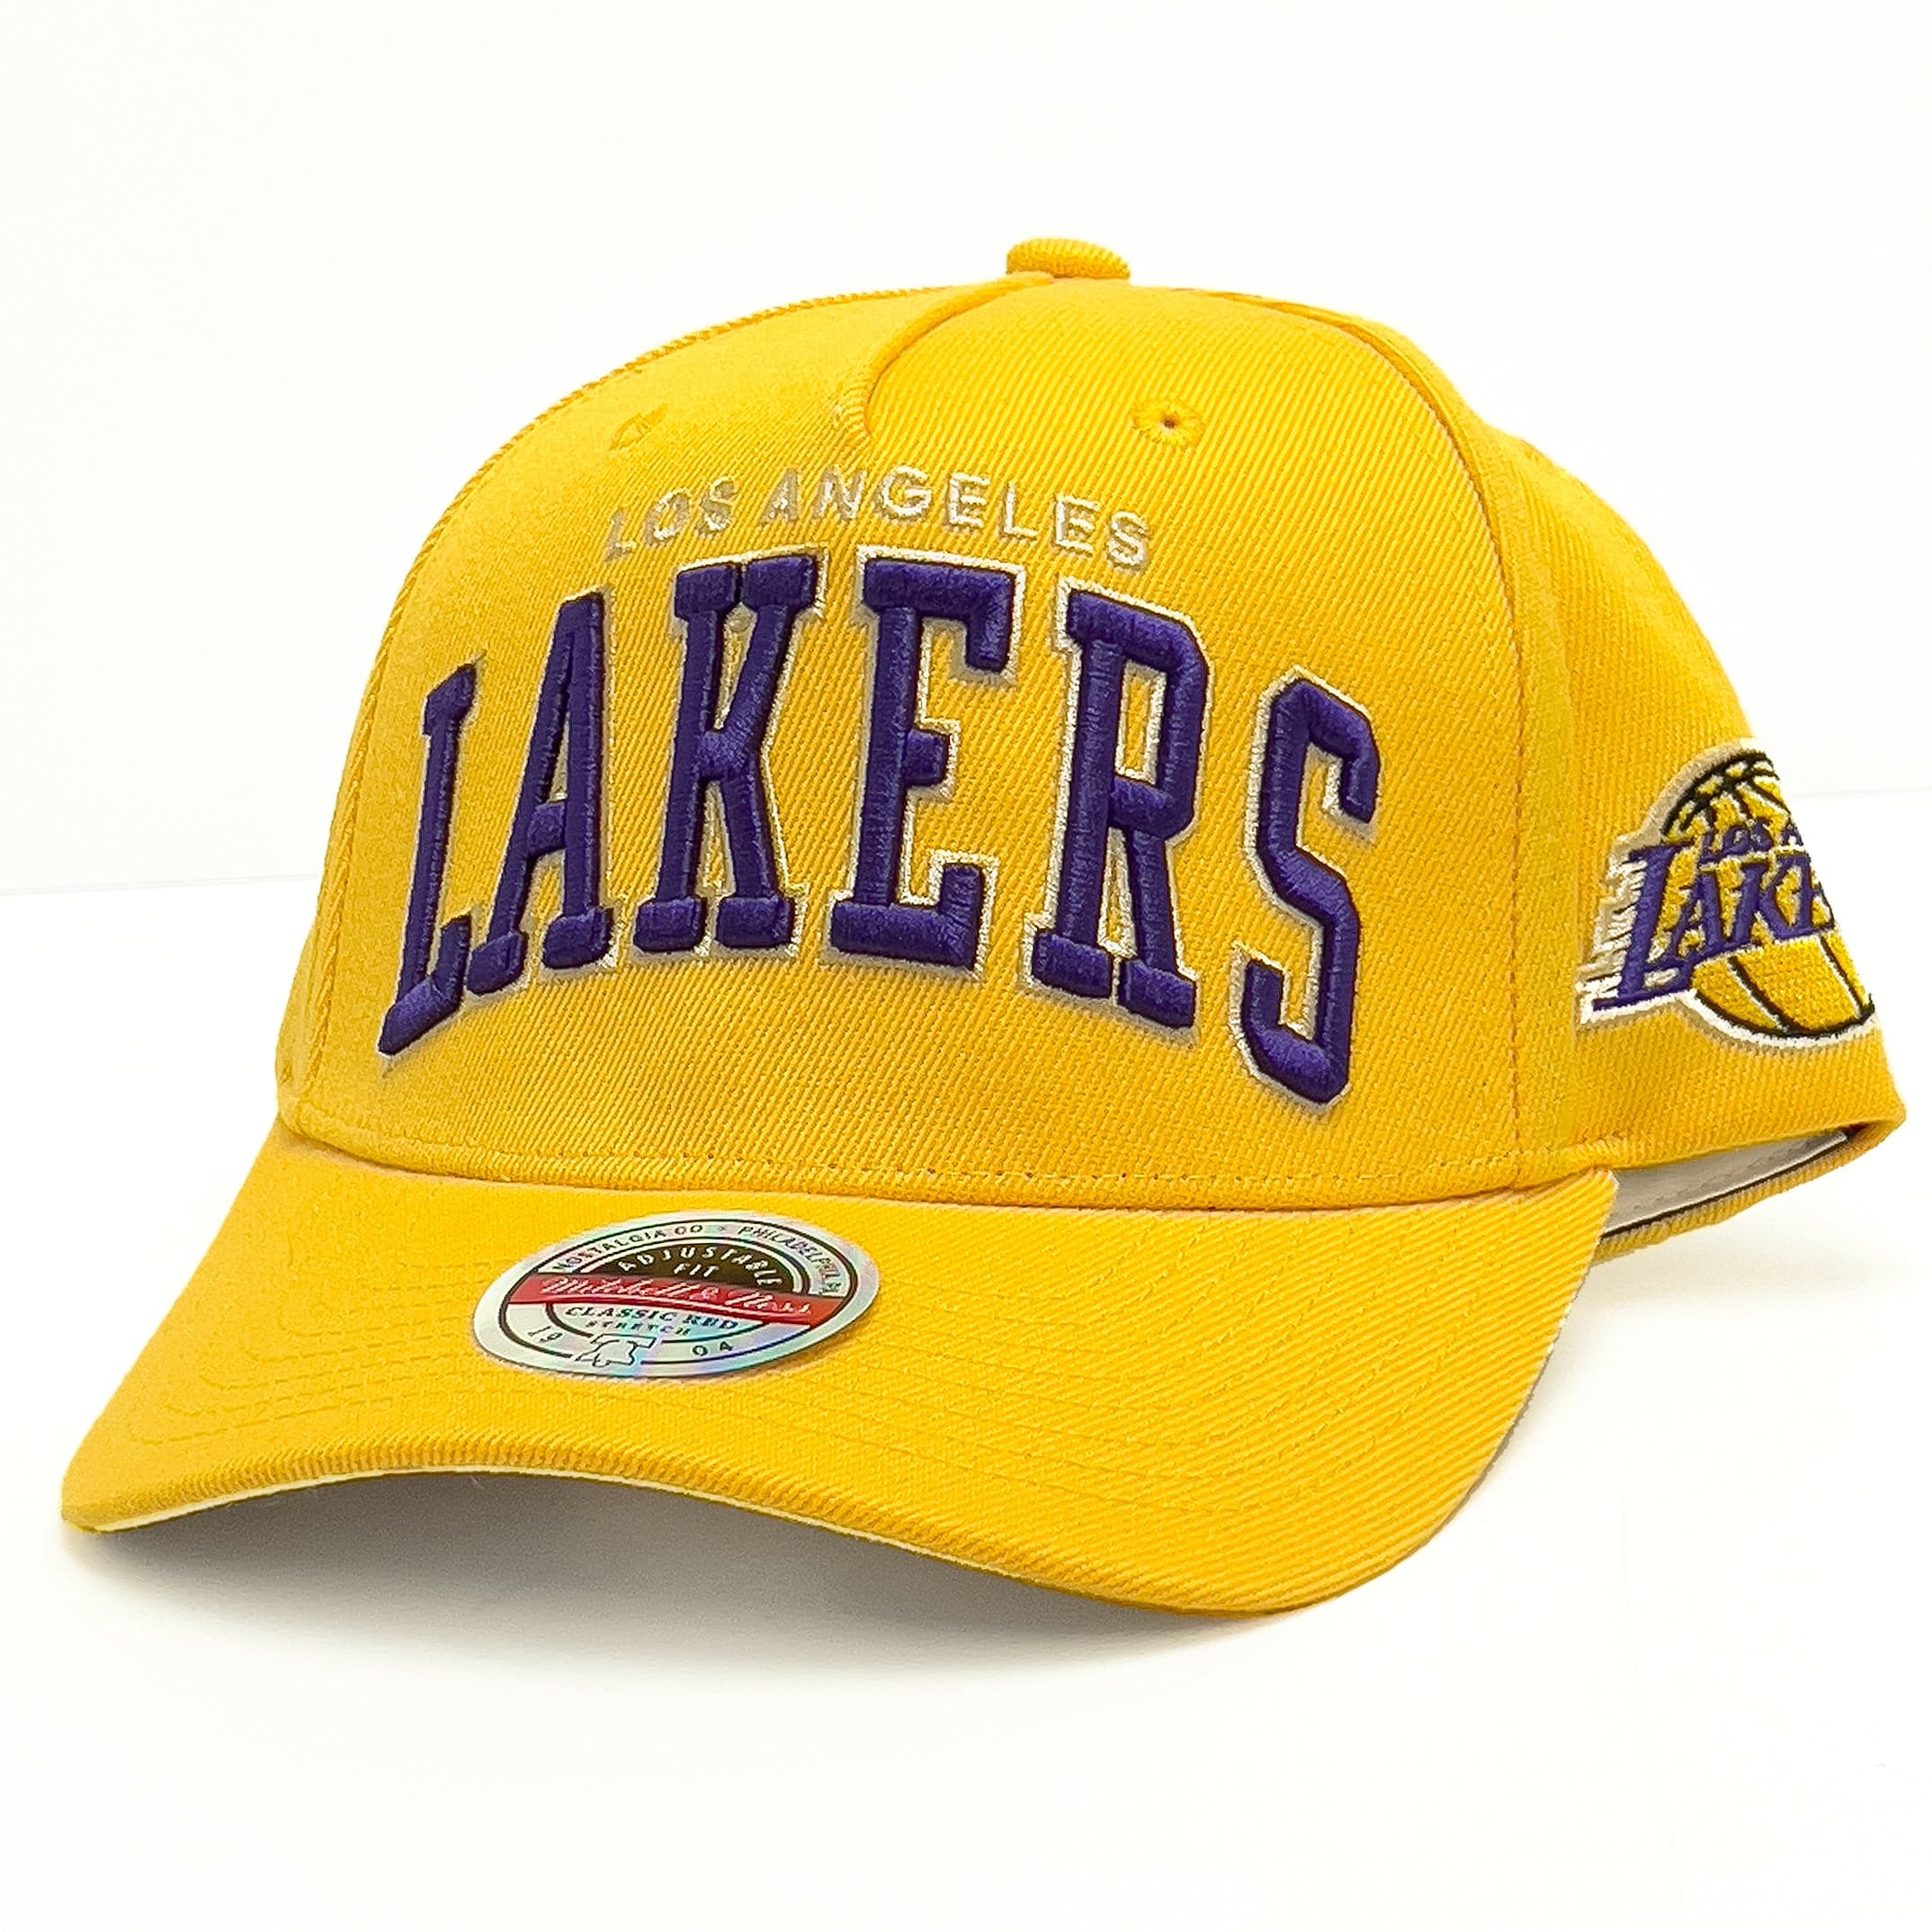 Mitchell & Ness Los Angeles Lakers Red Era Adjustable Snapback Hat Cap